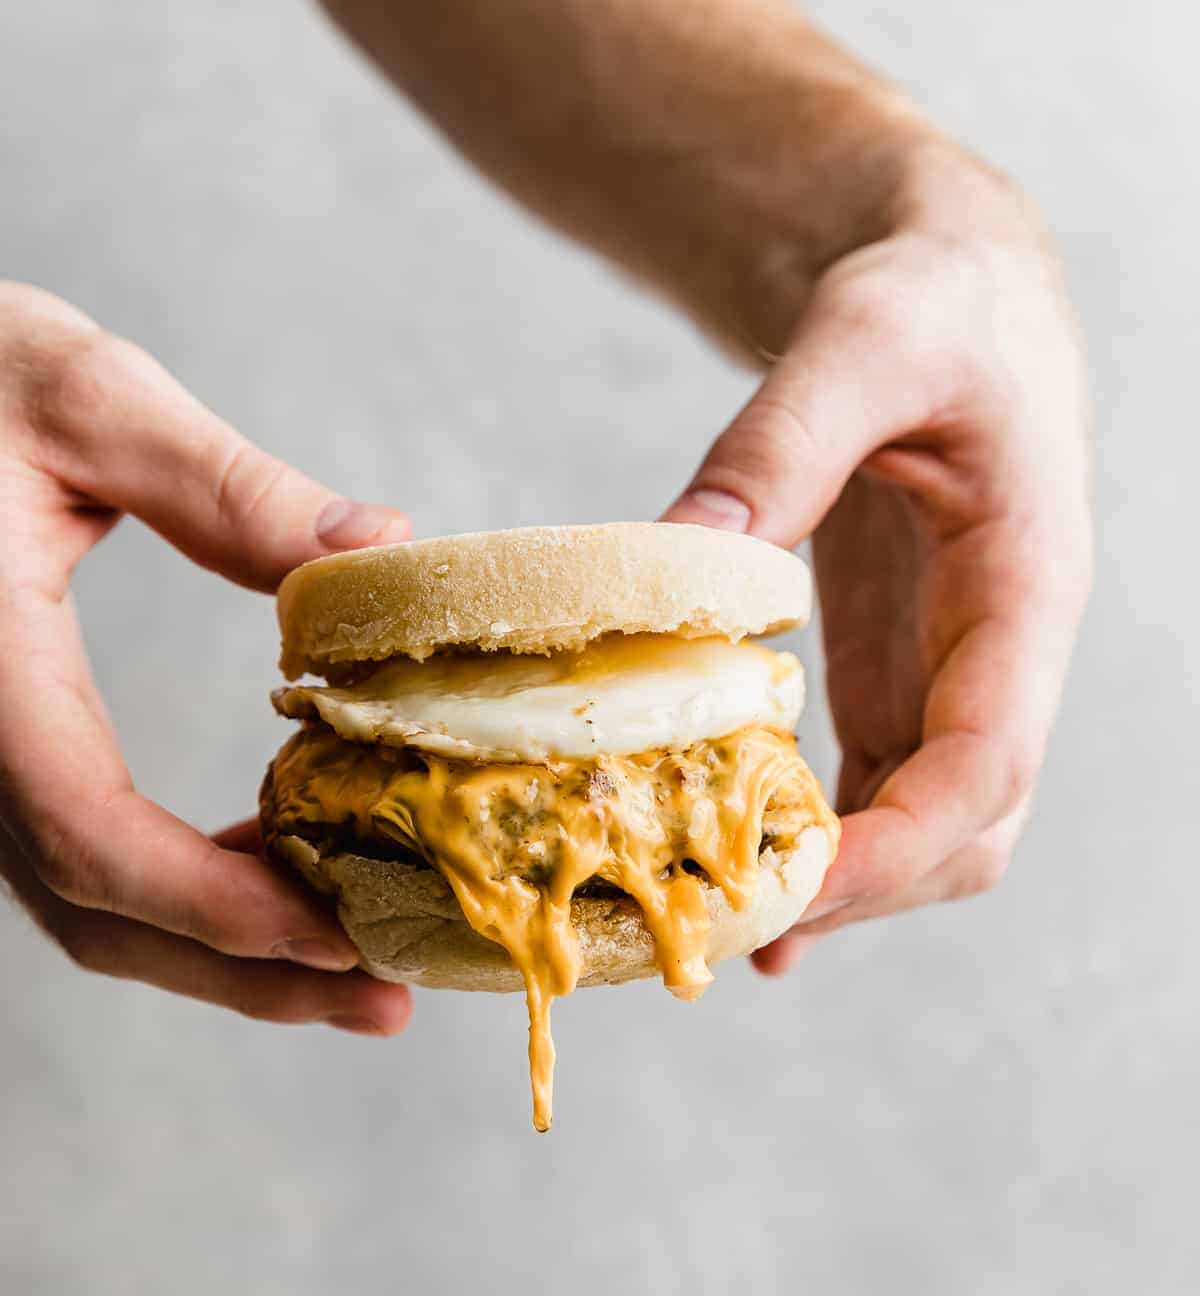 A set of hands holding a Homemade Sausage and Egg McMuffin against a gray background.